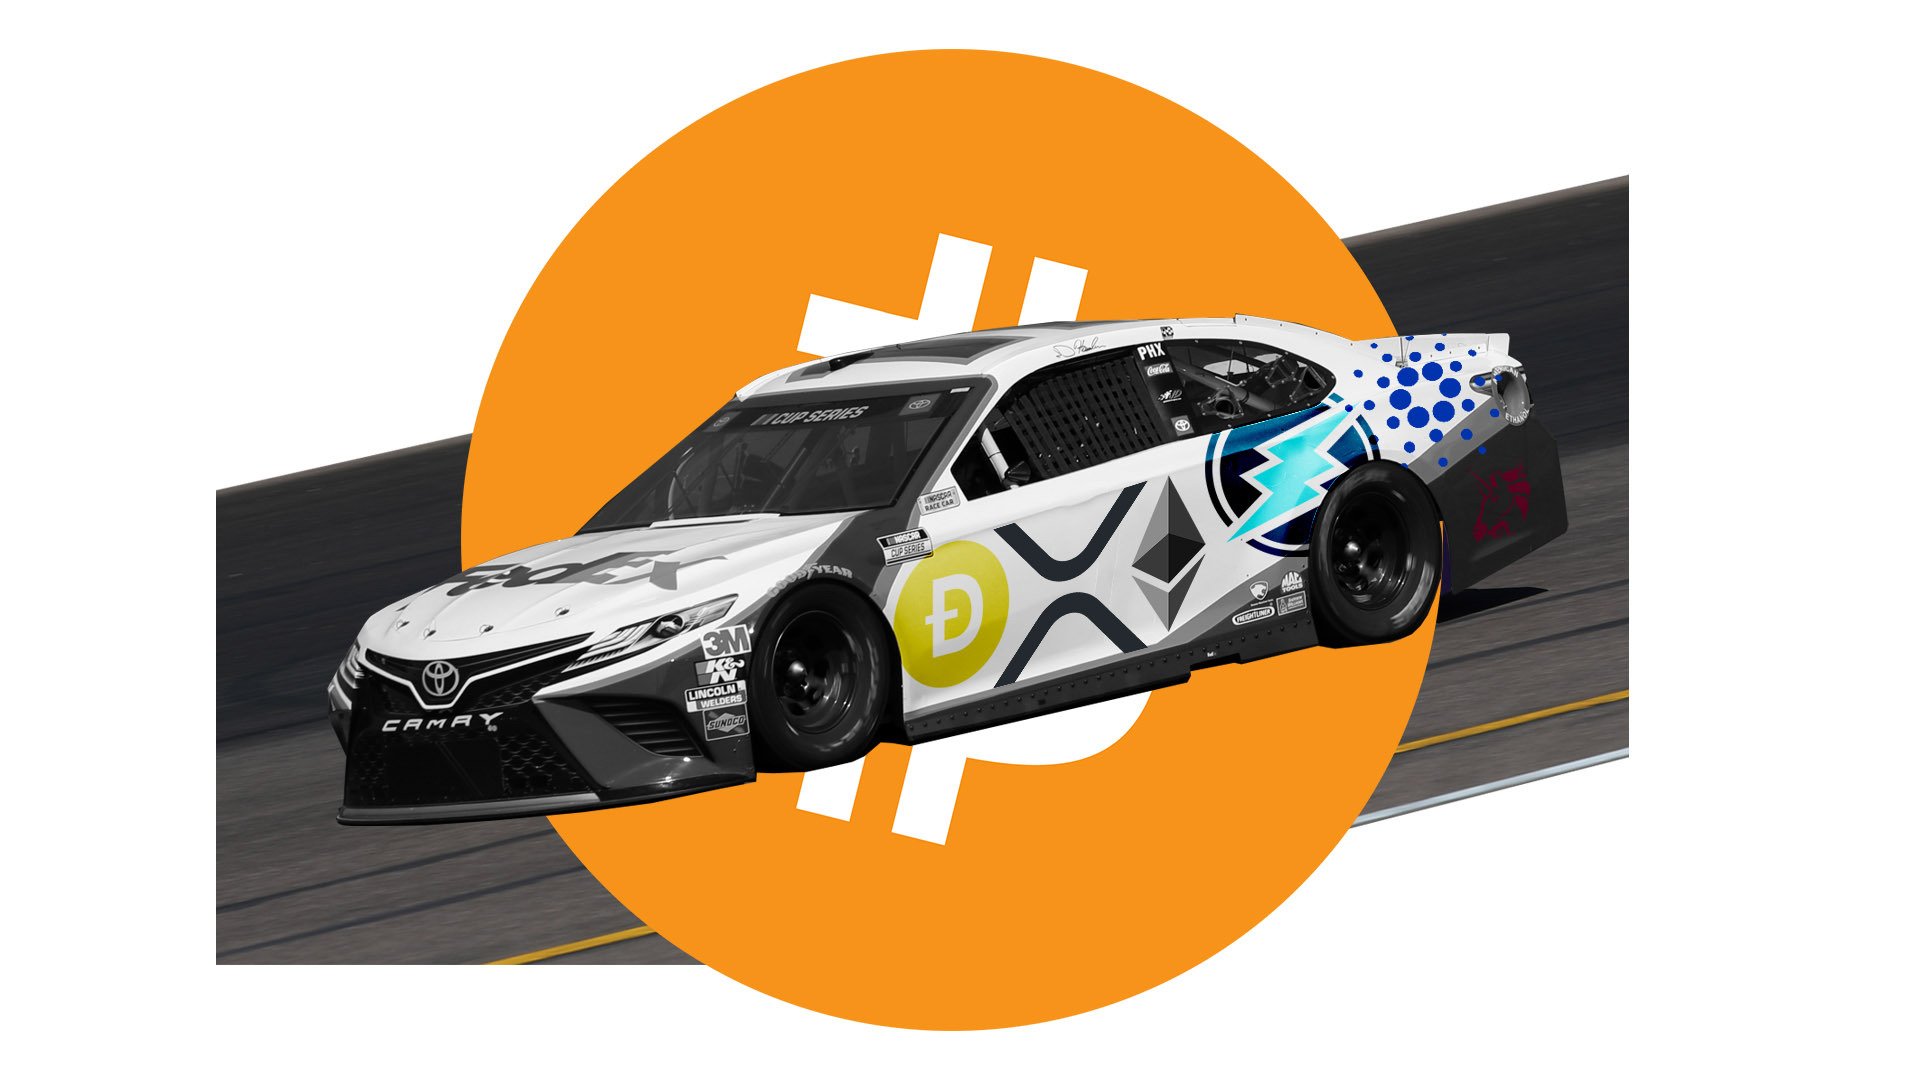 The American Dream Nascar Driver to Receive a Crypto Salary